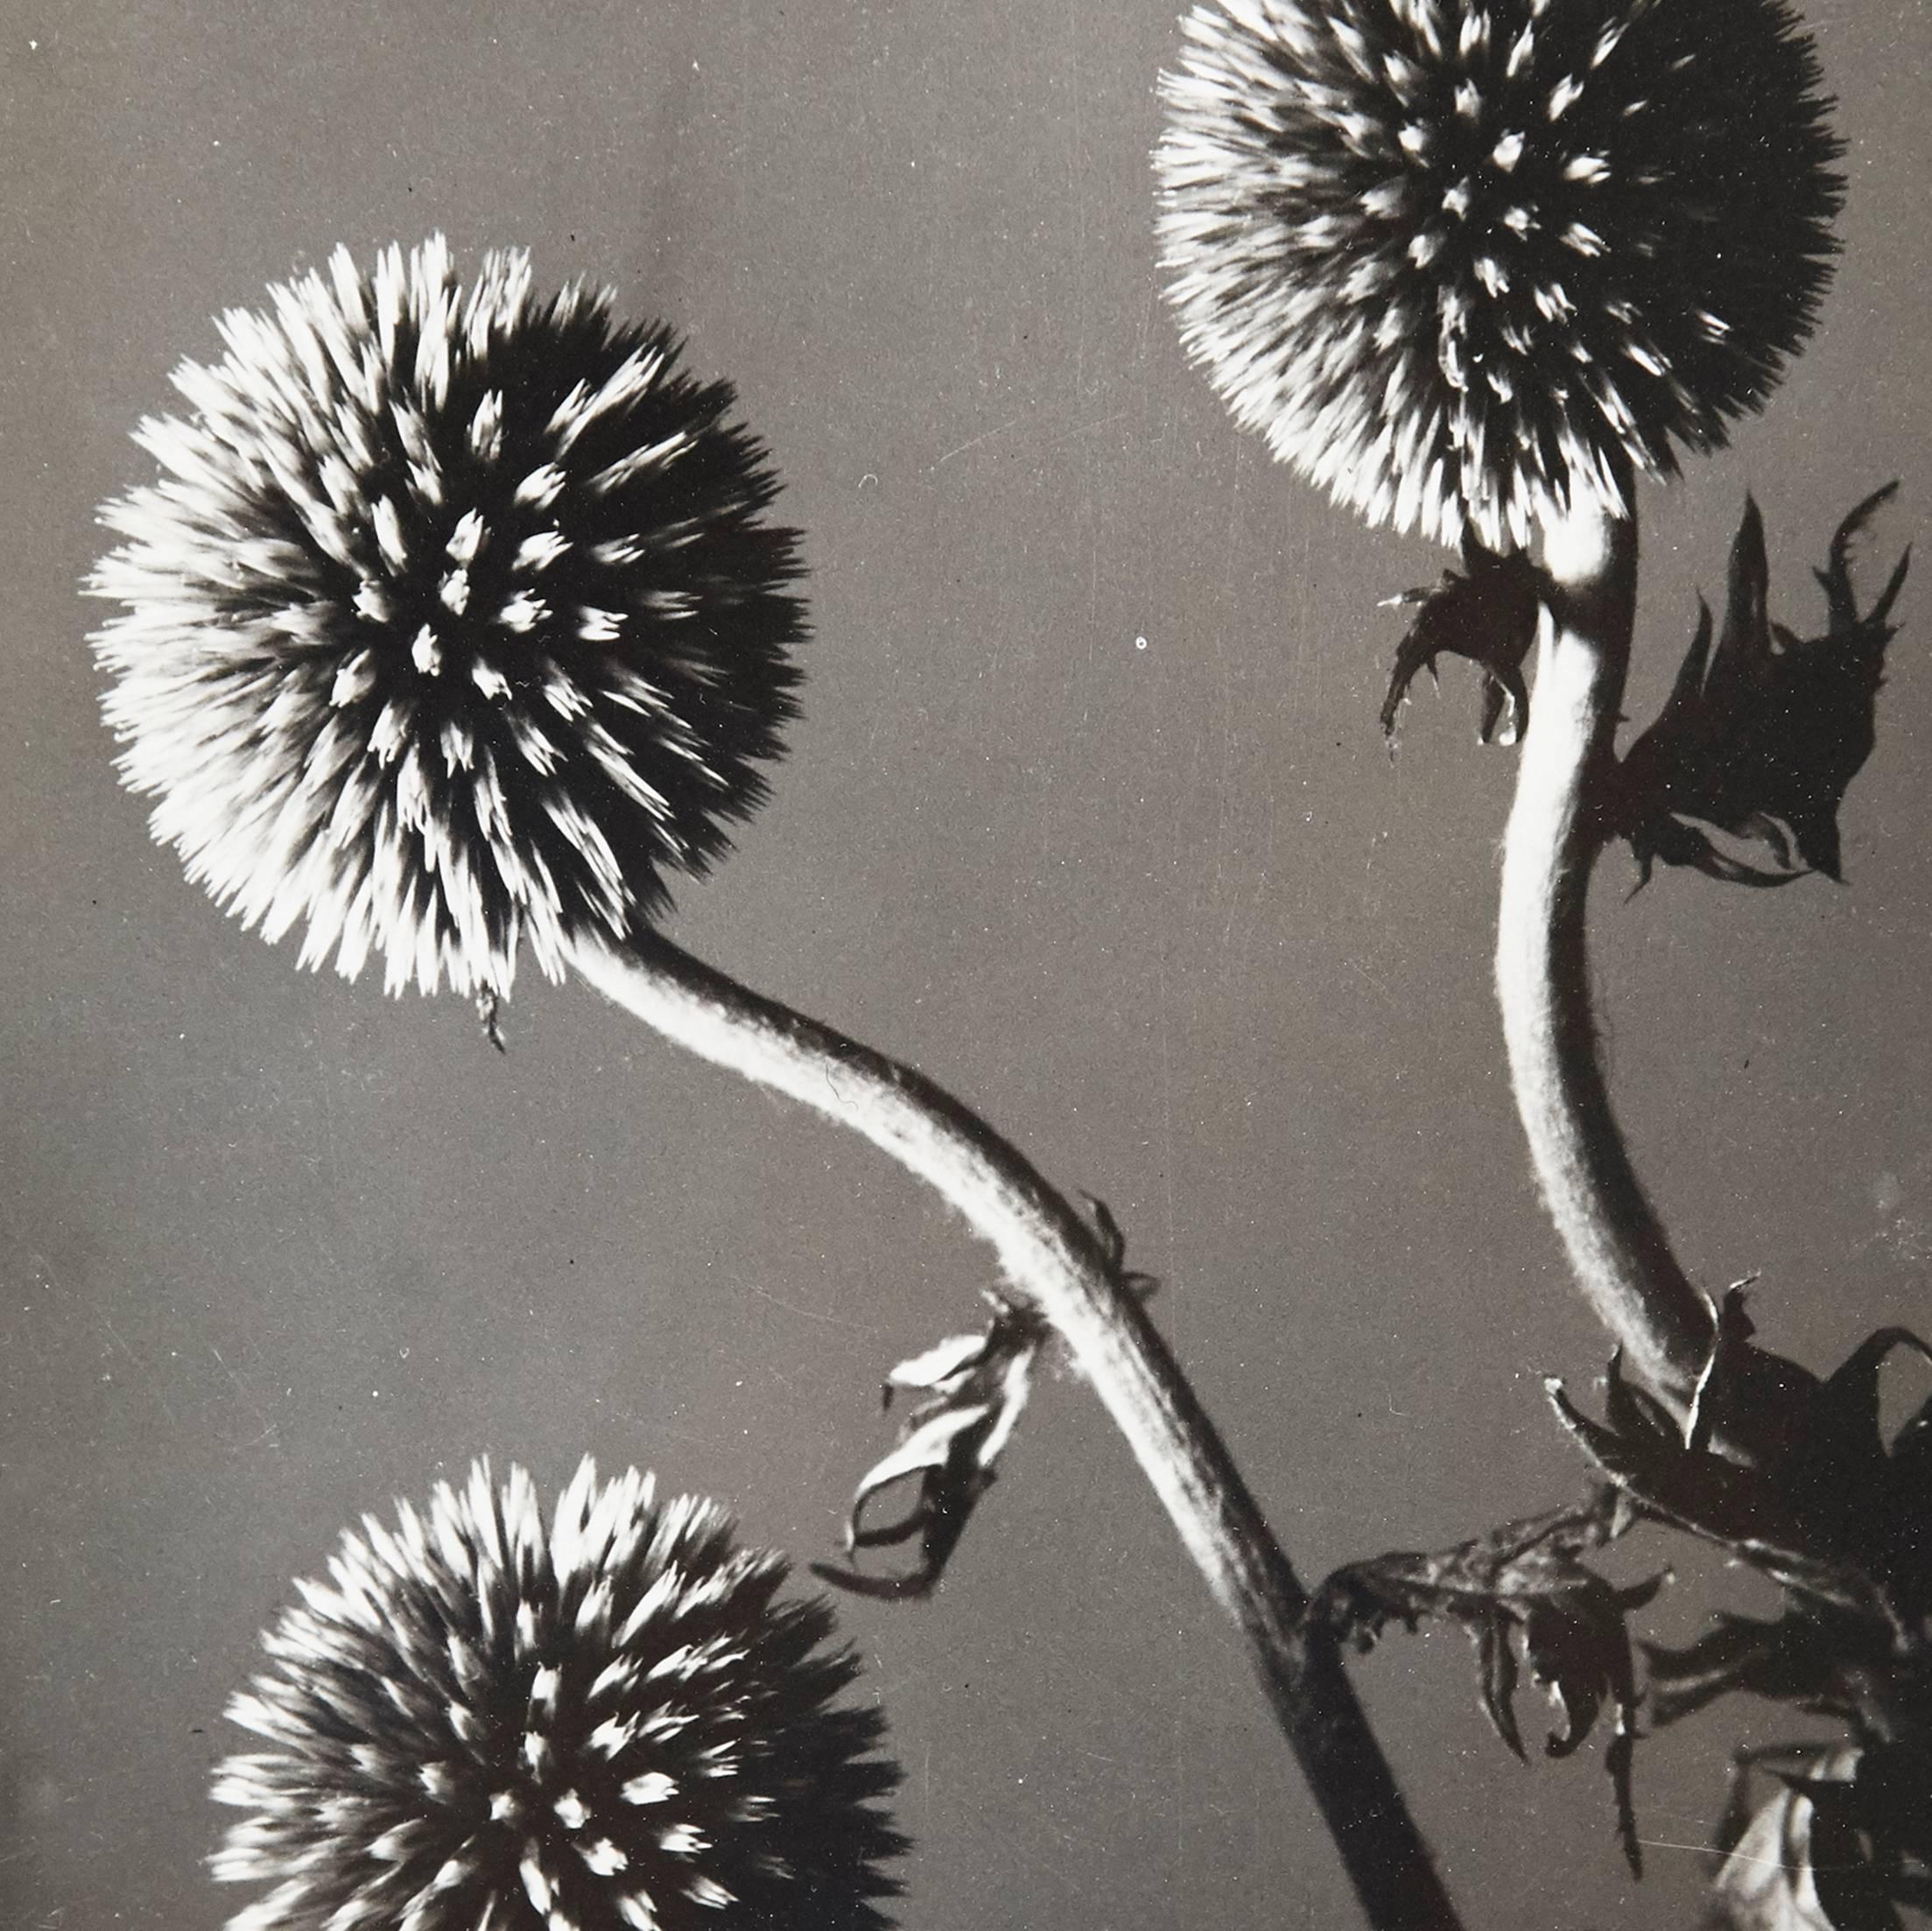 Flowers photographed by Man Ray in 1934.

A posthumous print from the original negative around 1970 by Pierre Gassmann. Gelatin silver bromide.
Frame not included.

In good original conditions.

Born (Philadelphia, 1890 - Paris, 1976) Emmanuel